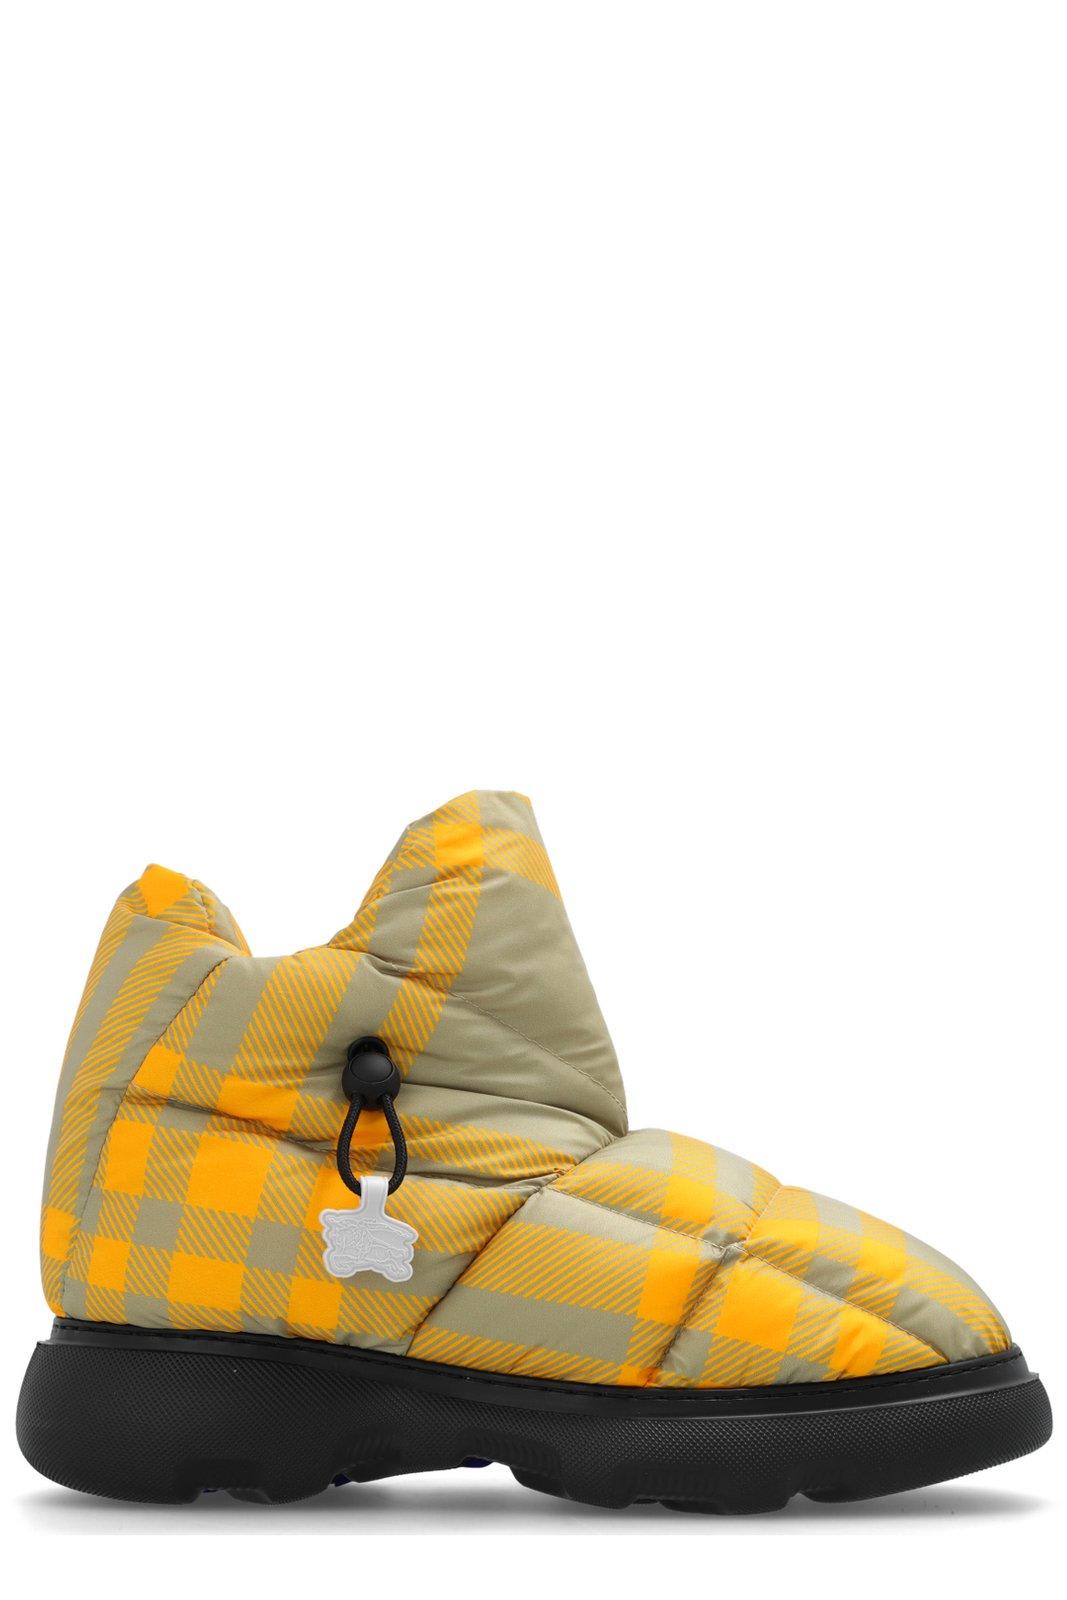 BURBERRY PILLOW CHECK BOOTS